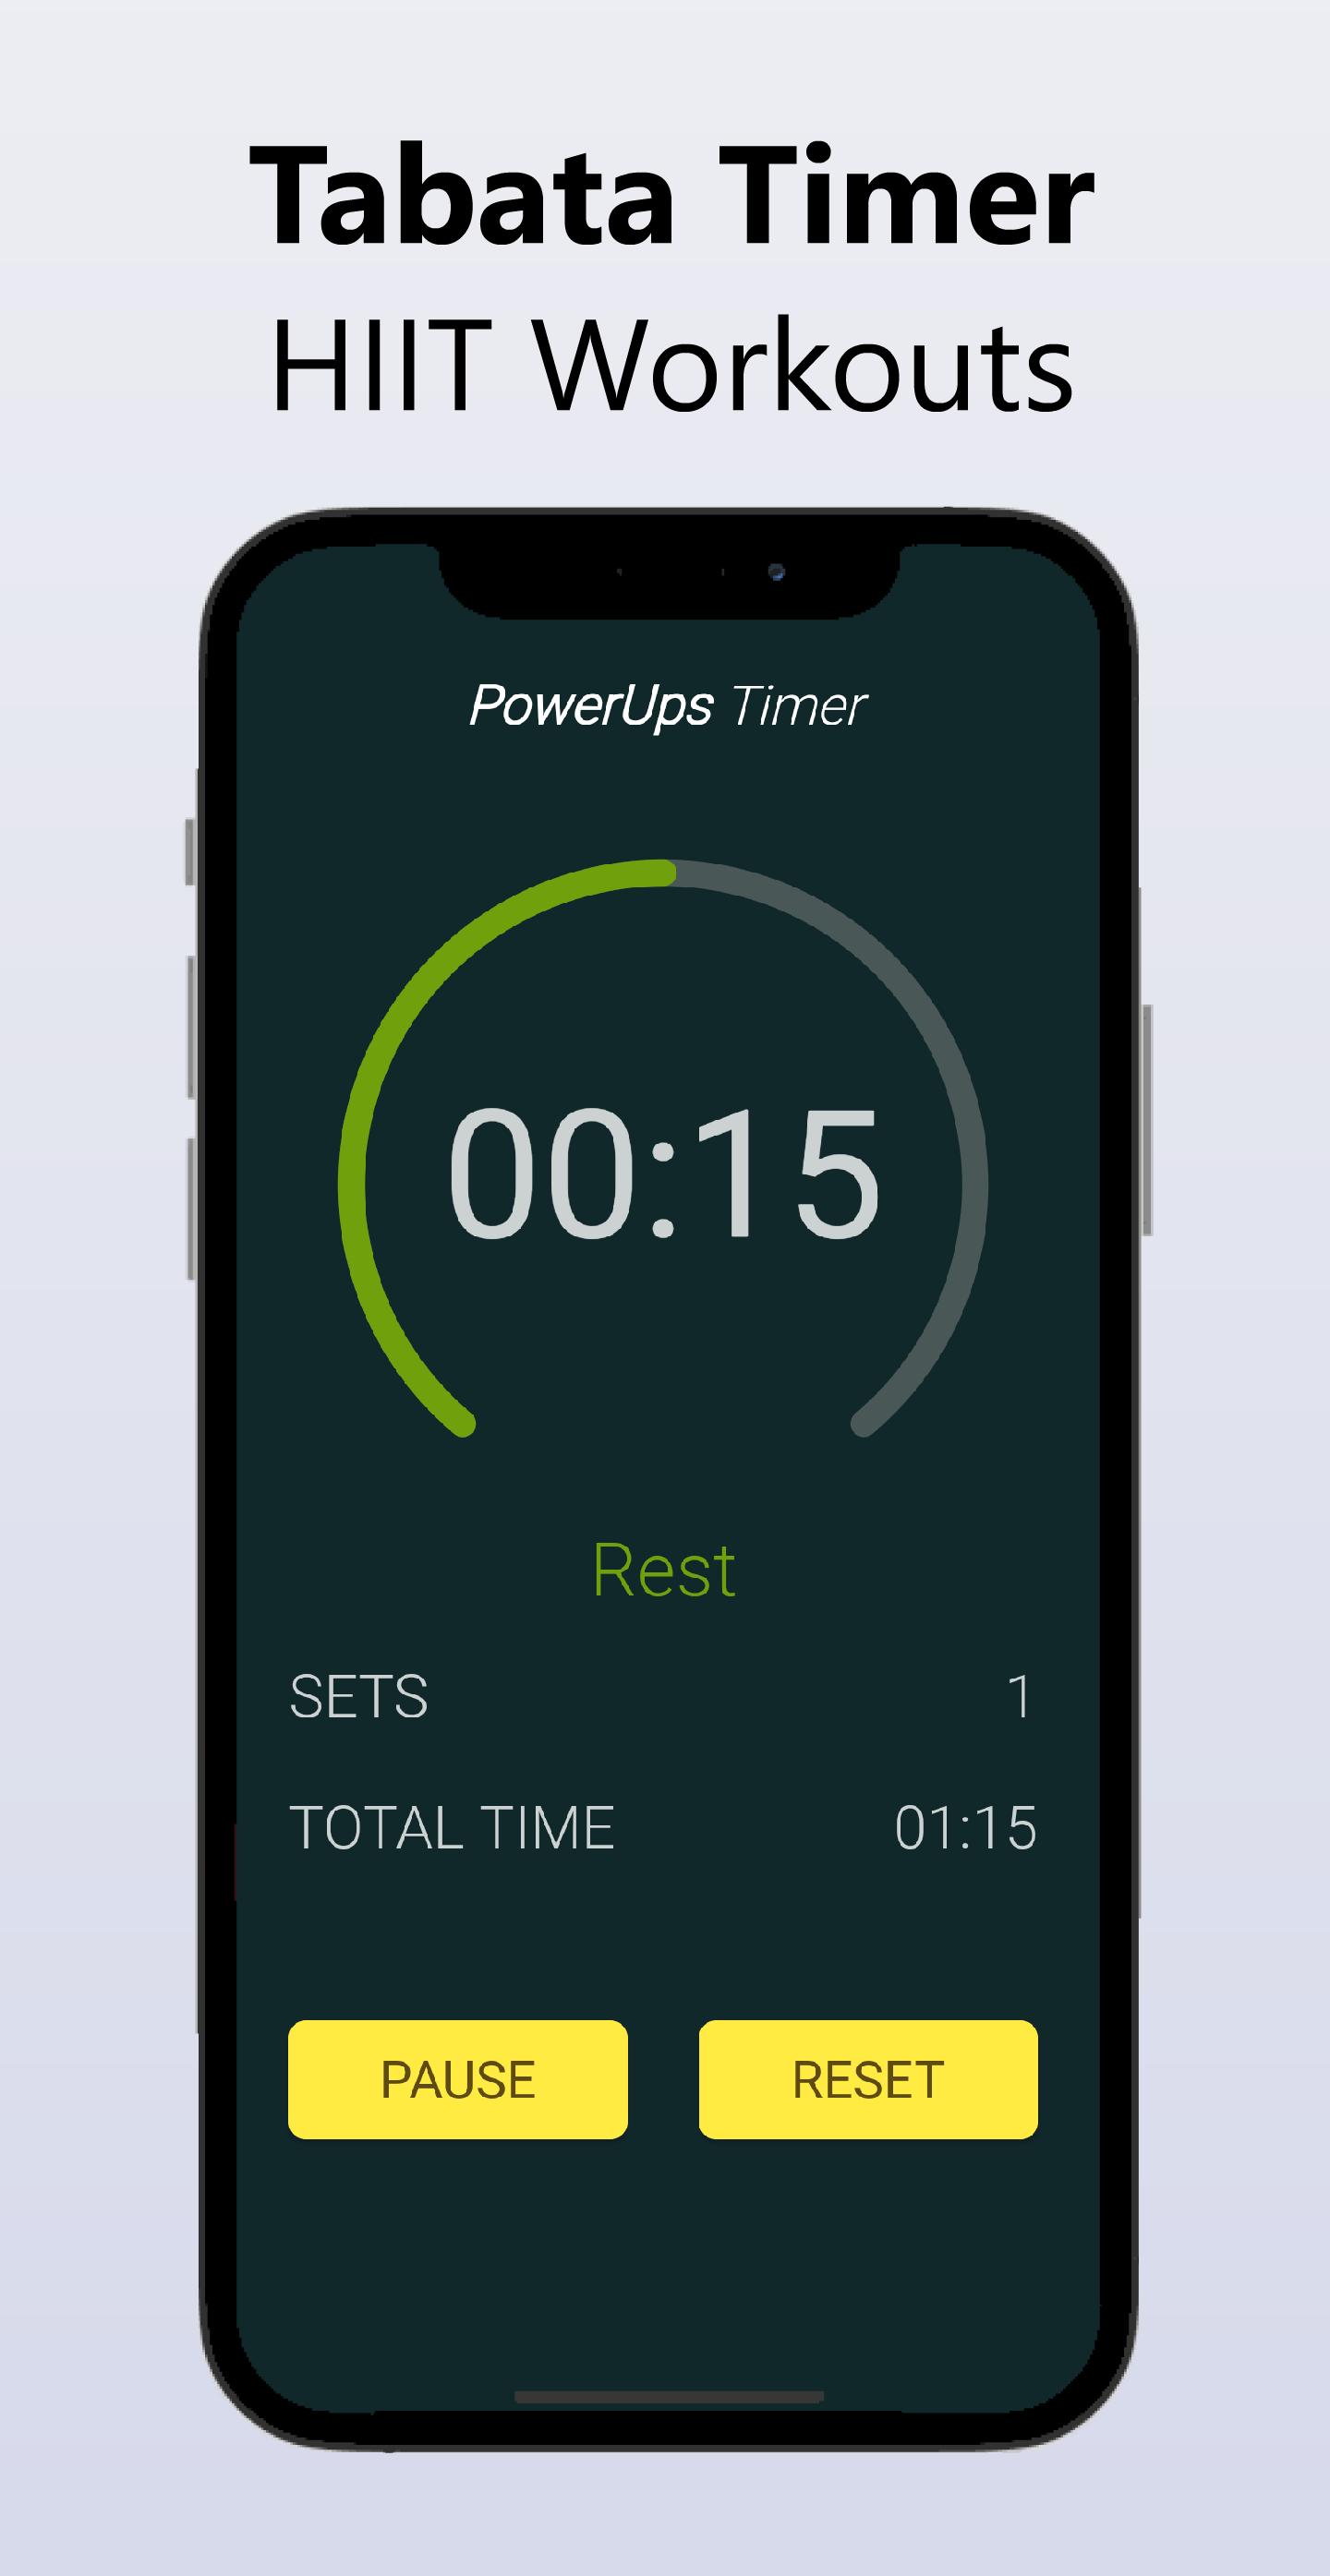 Interval Timer: Tabata Timer for Android - APK Download